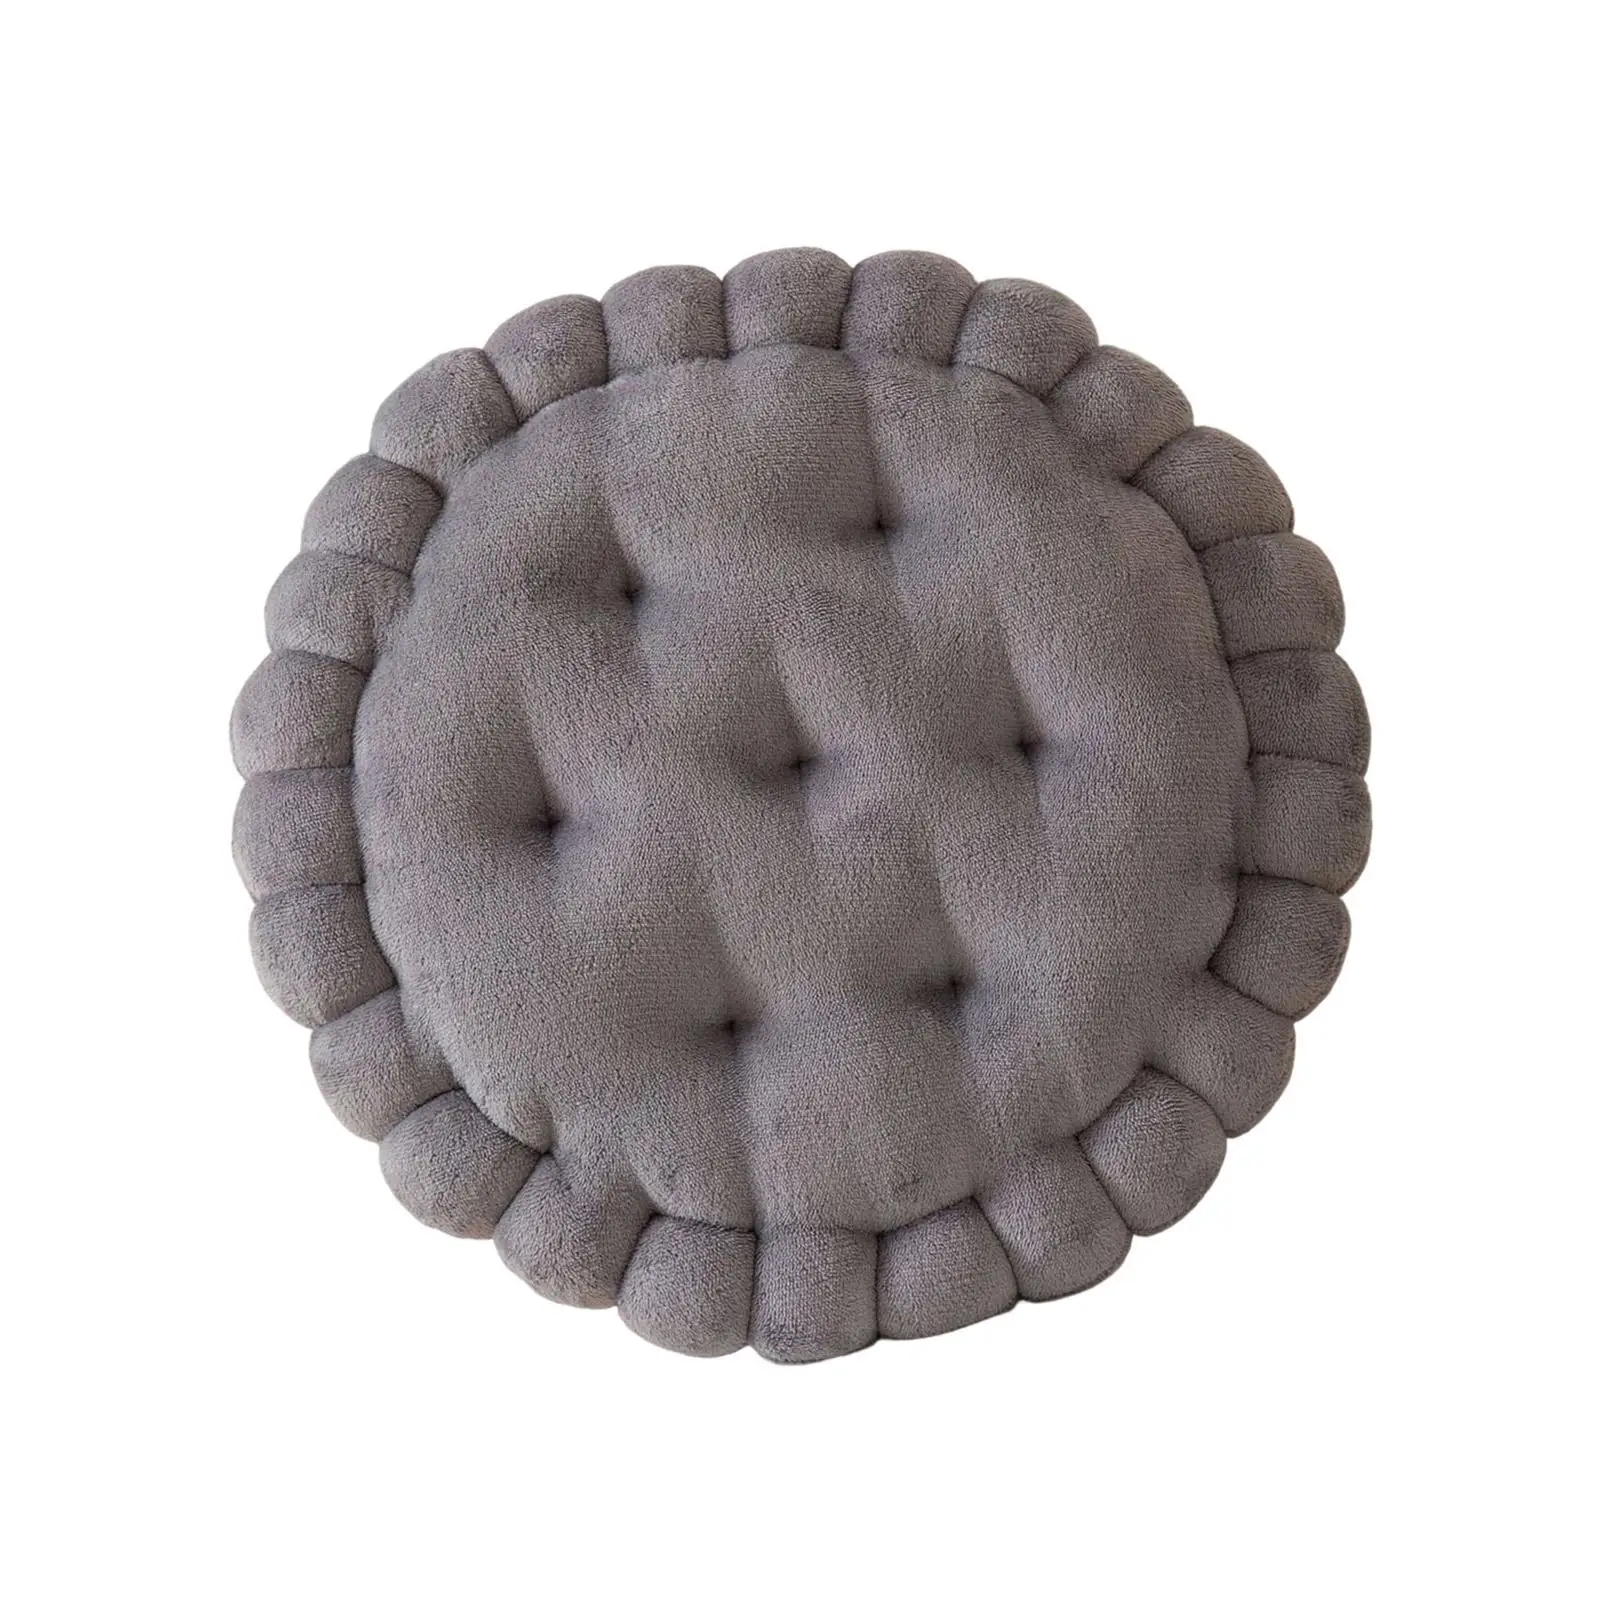 Sofa Seat Cushion Mat Round Biscuit Shape Padded Cotton Decoration Furniture Cute Chair Pad for Living Room Balcony Yoga